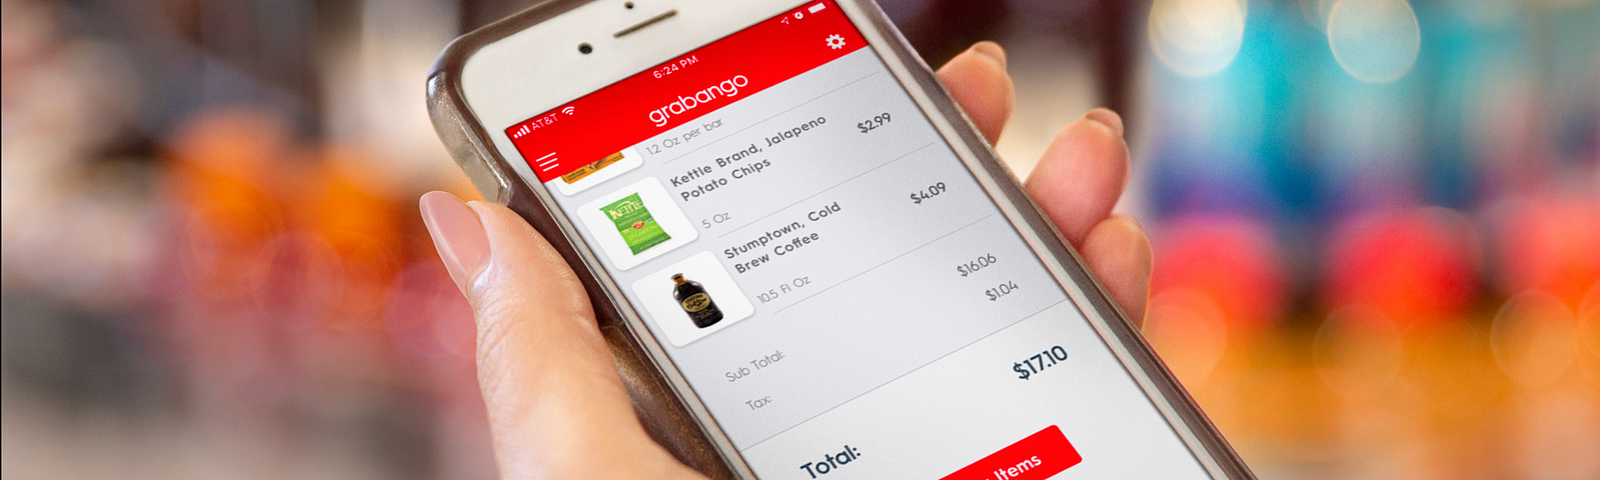 The Grabango app showing items being purchased.